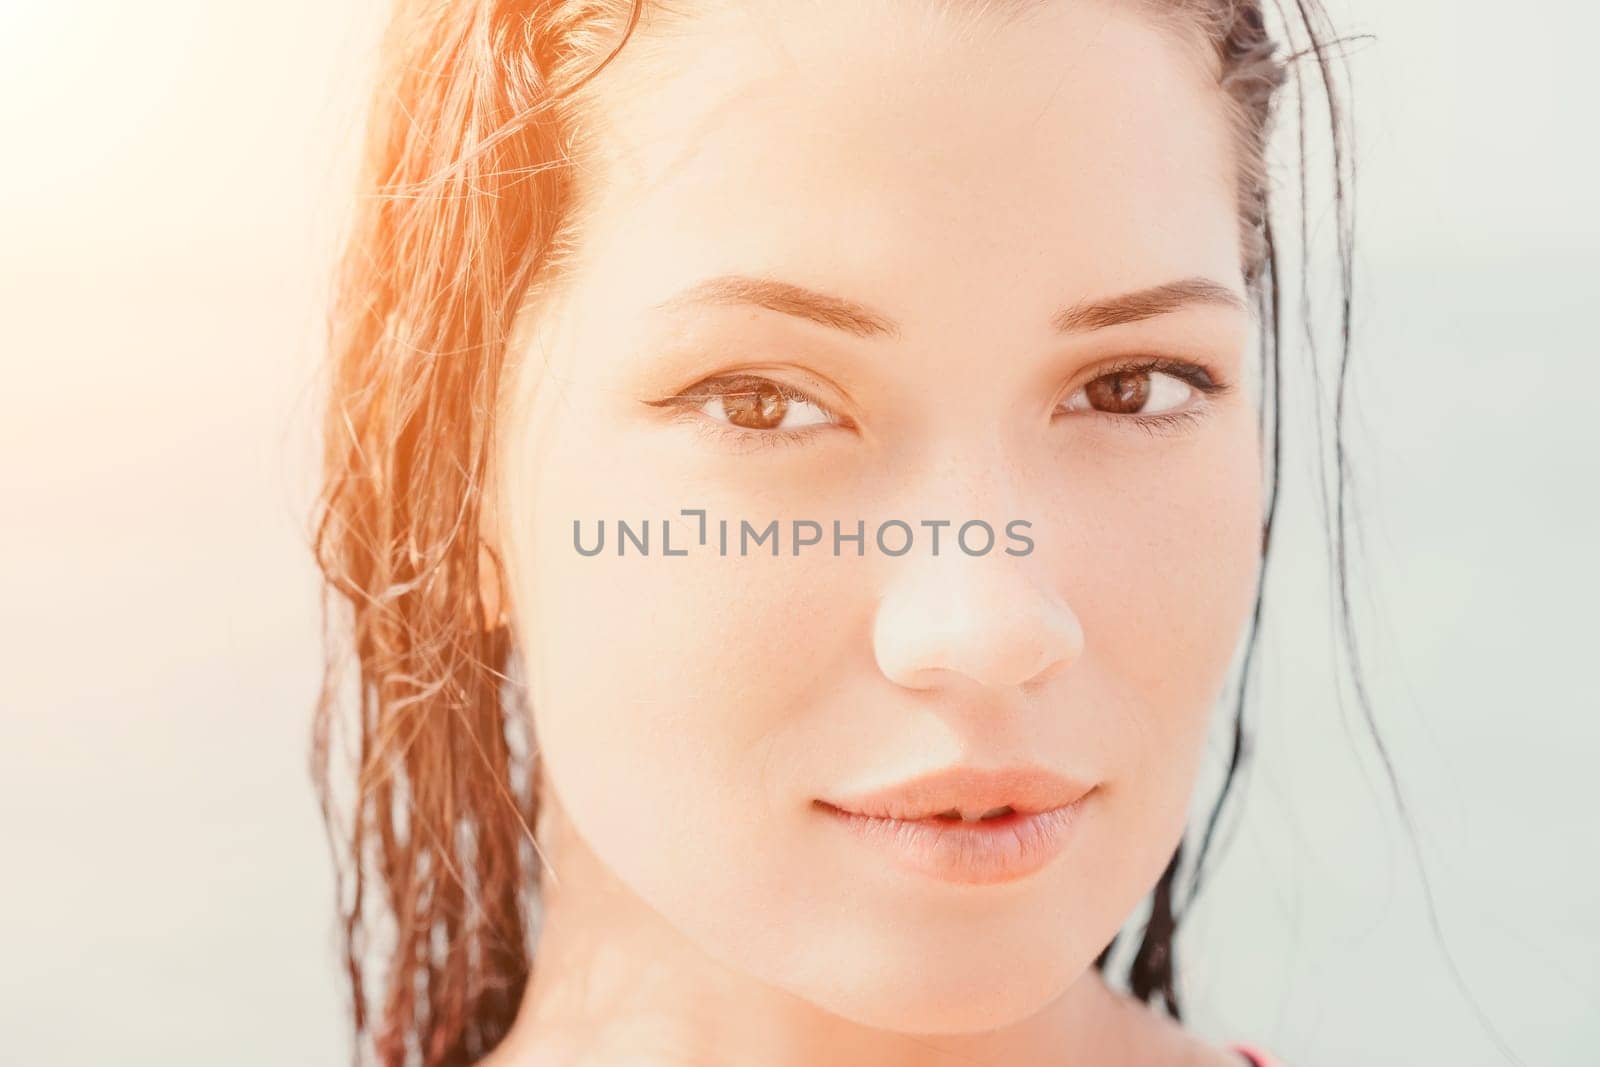 Woman sea sup. Close up portrait of beautiful young caucasian woman with black hair and freckles looking at camera and smiling. Cute woman portrait in a pink bikini posing on sup board in the sea. by panophotograph